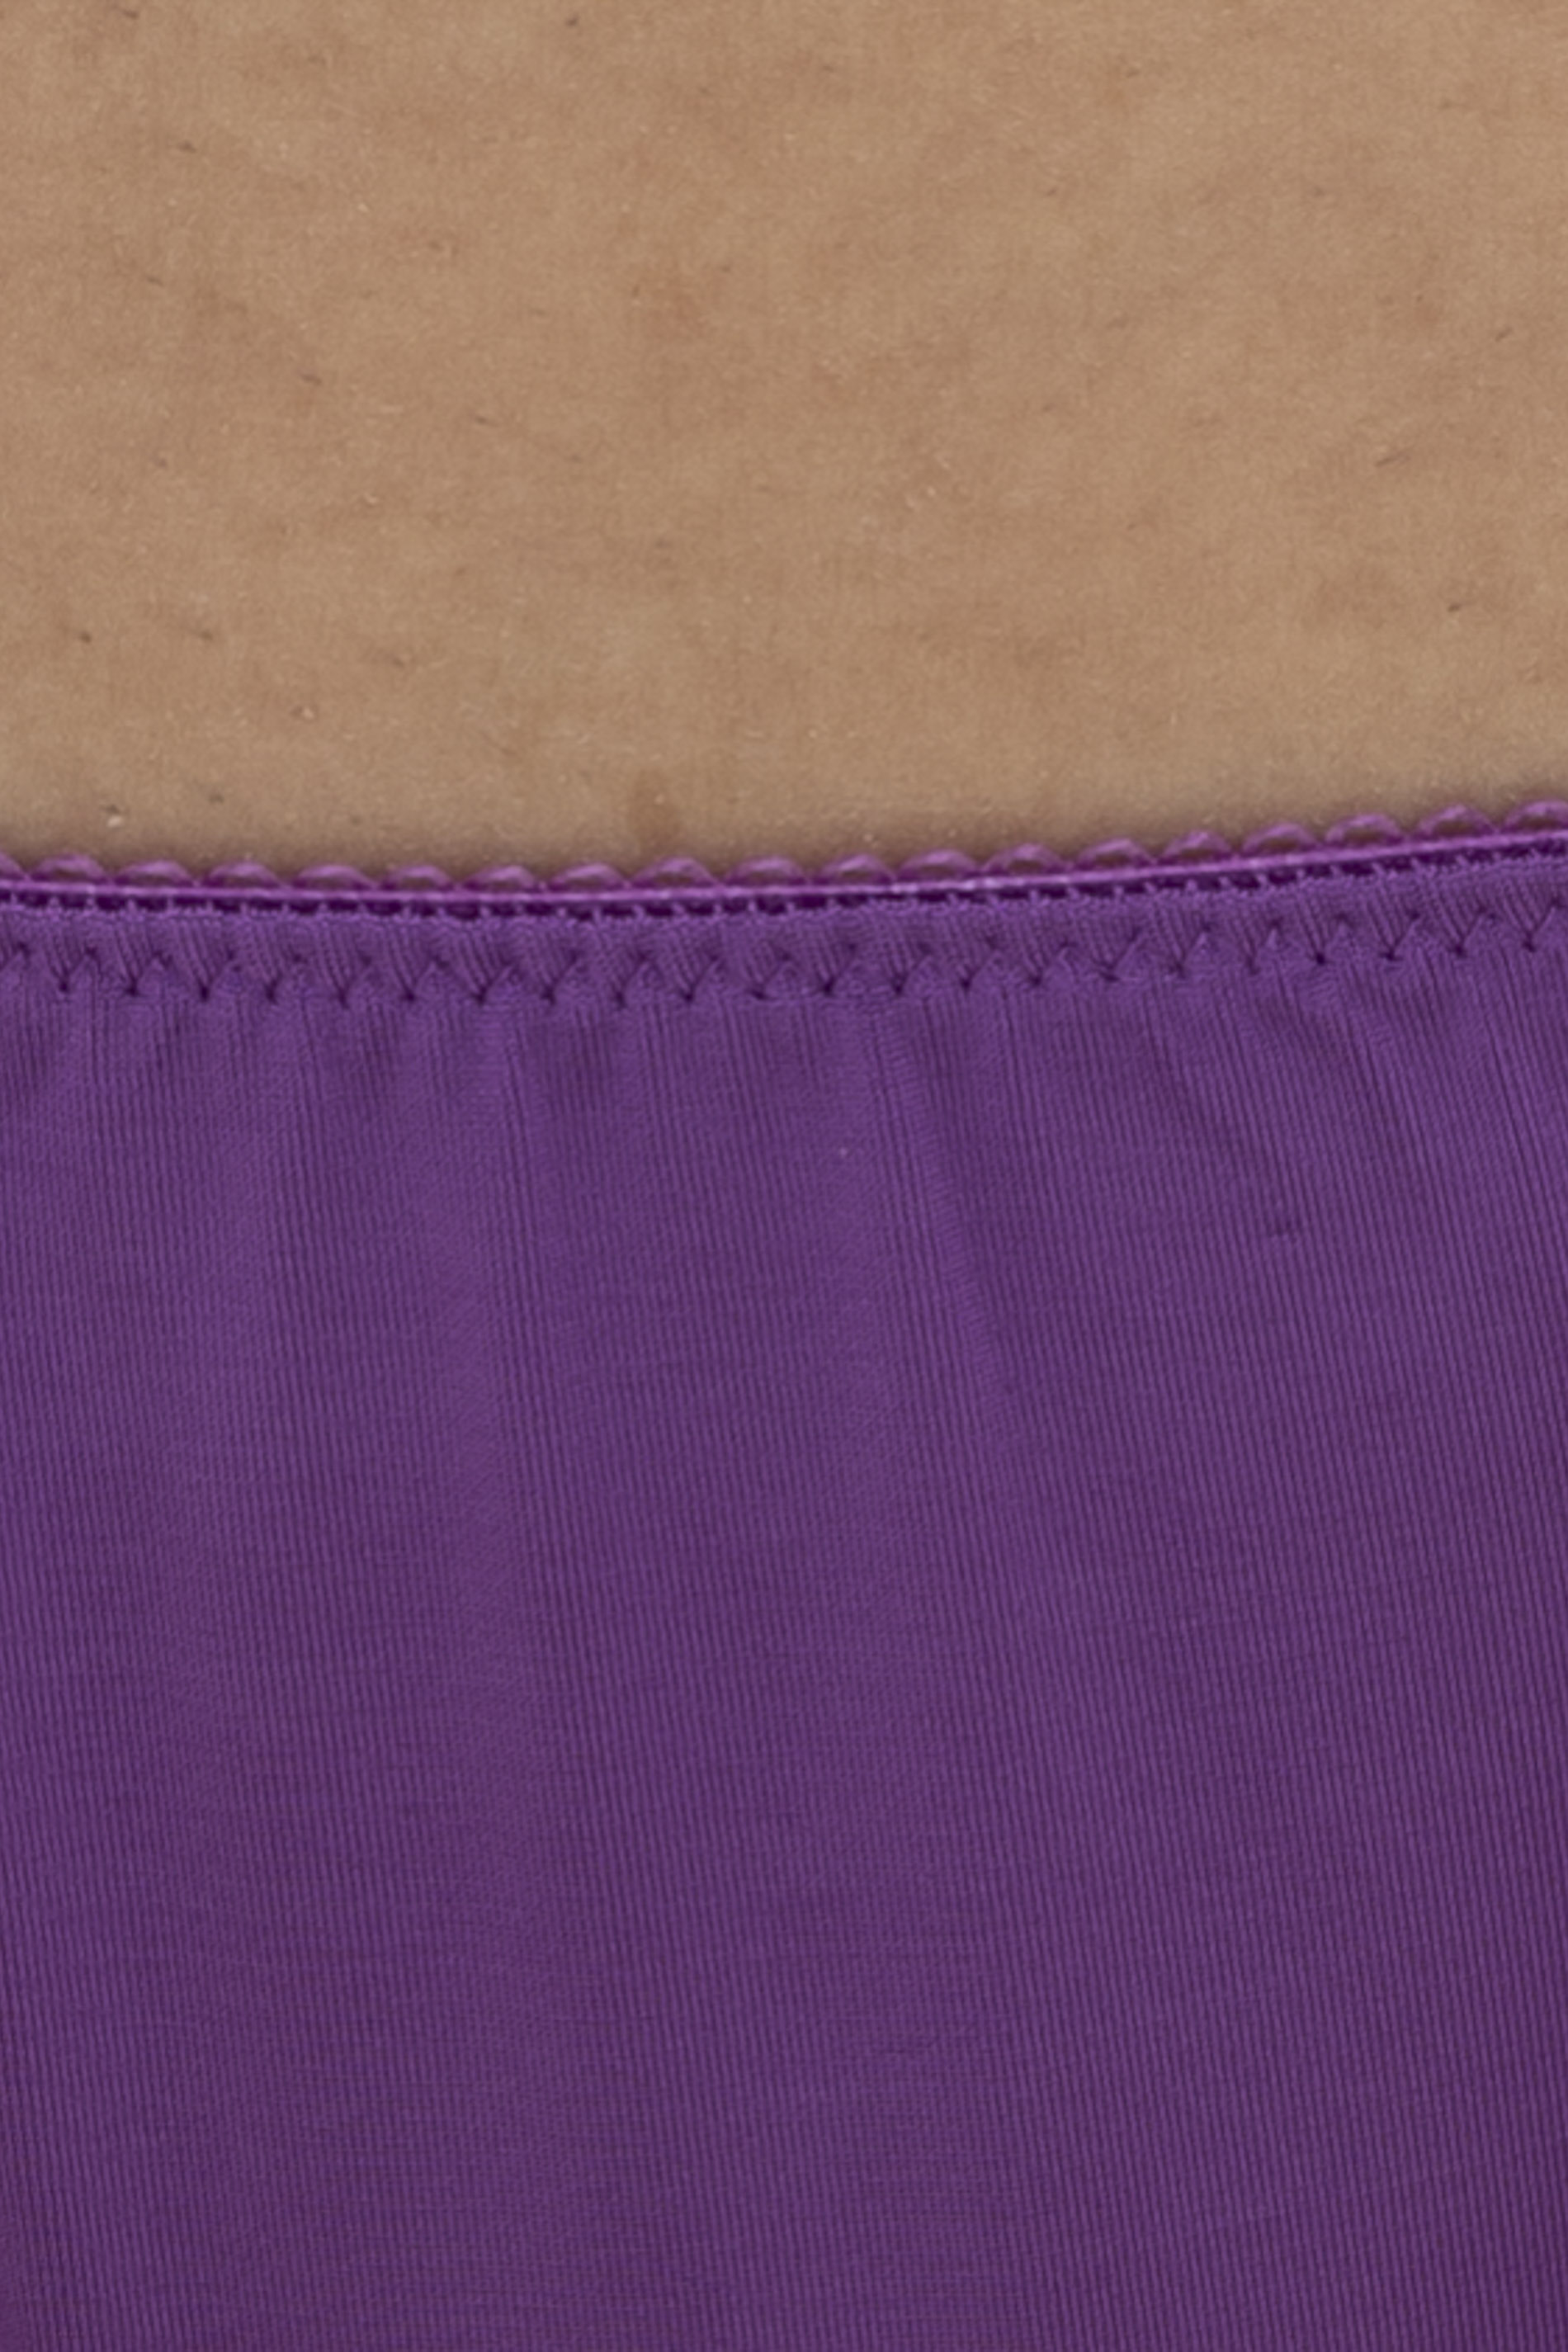 Thong Fresh Plum Serie Poetry Classy Detail View 01 | mey®